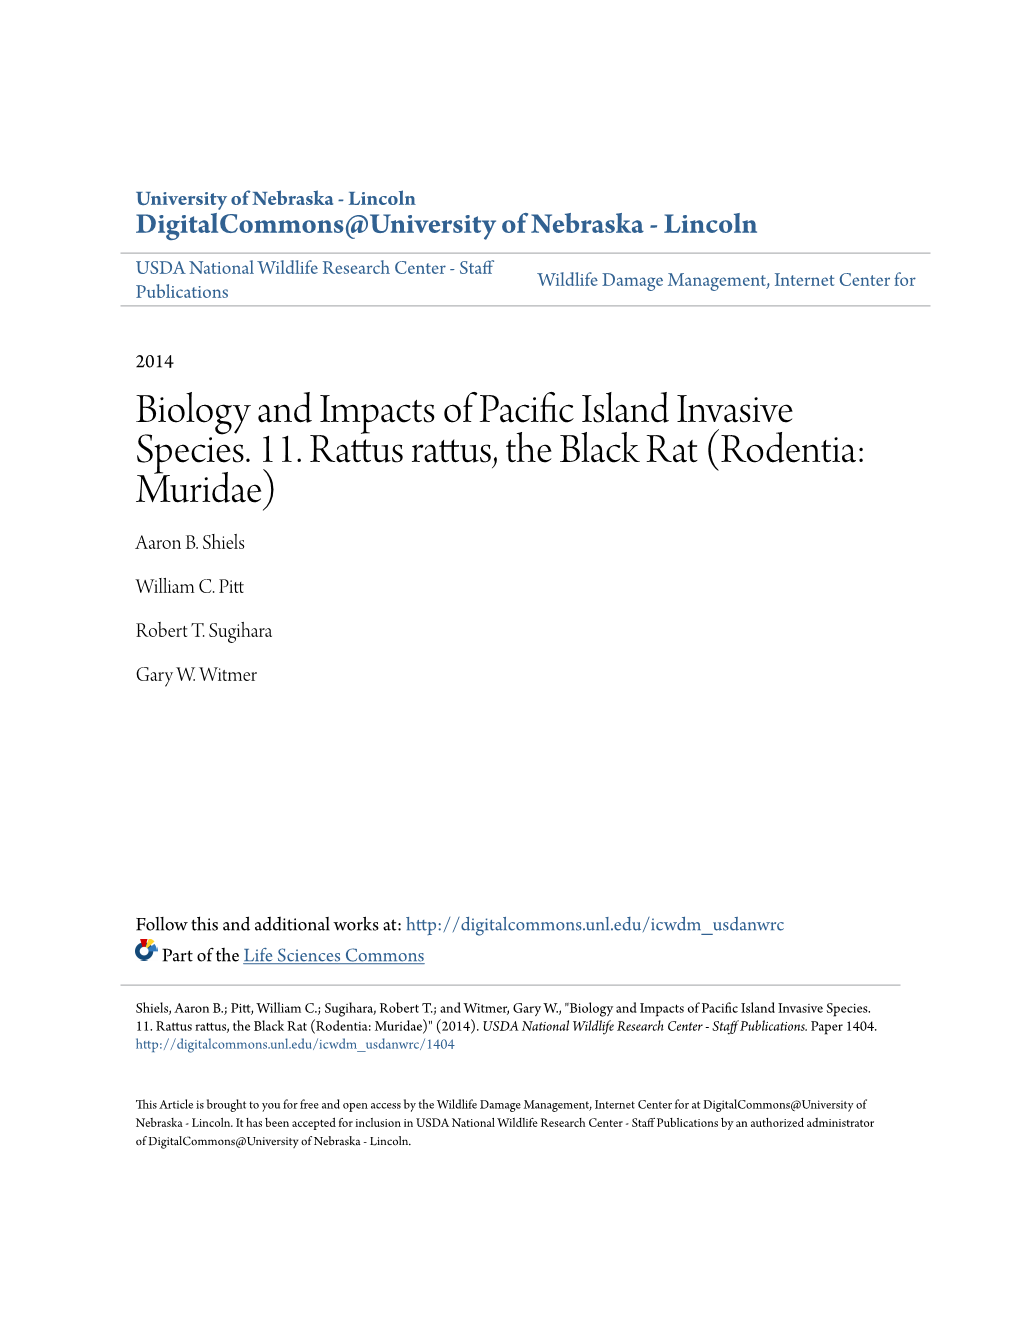 Biology and Impacts of Pacific Island Invasive Species. 11.Rattus Rattus, the Black Rat (Rodentia: Muridae)1